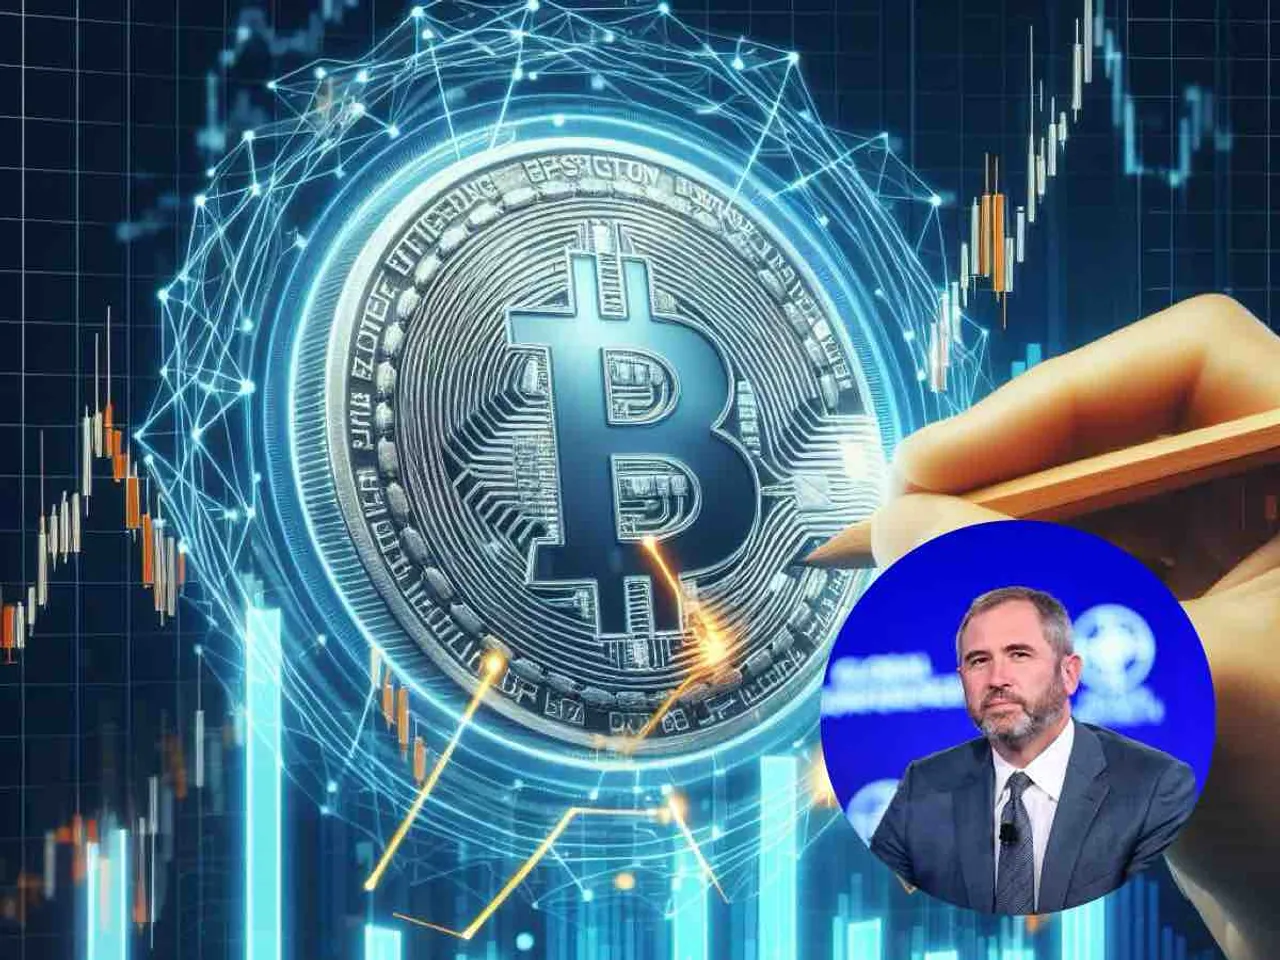 Ripple CEO Brad Garlinghouse makes sensational $5 trillion claim about crypto currency market